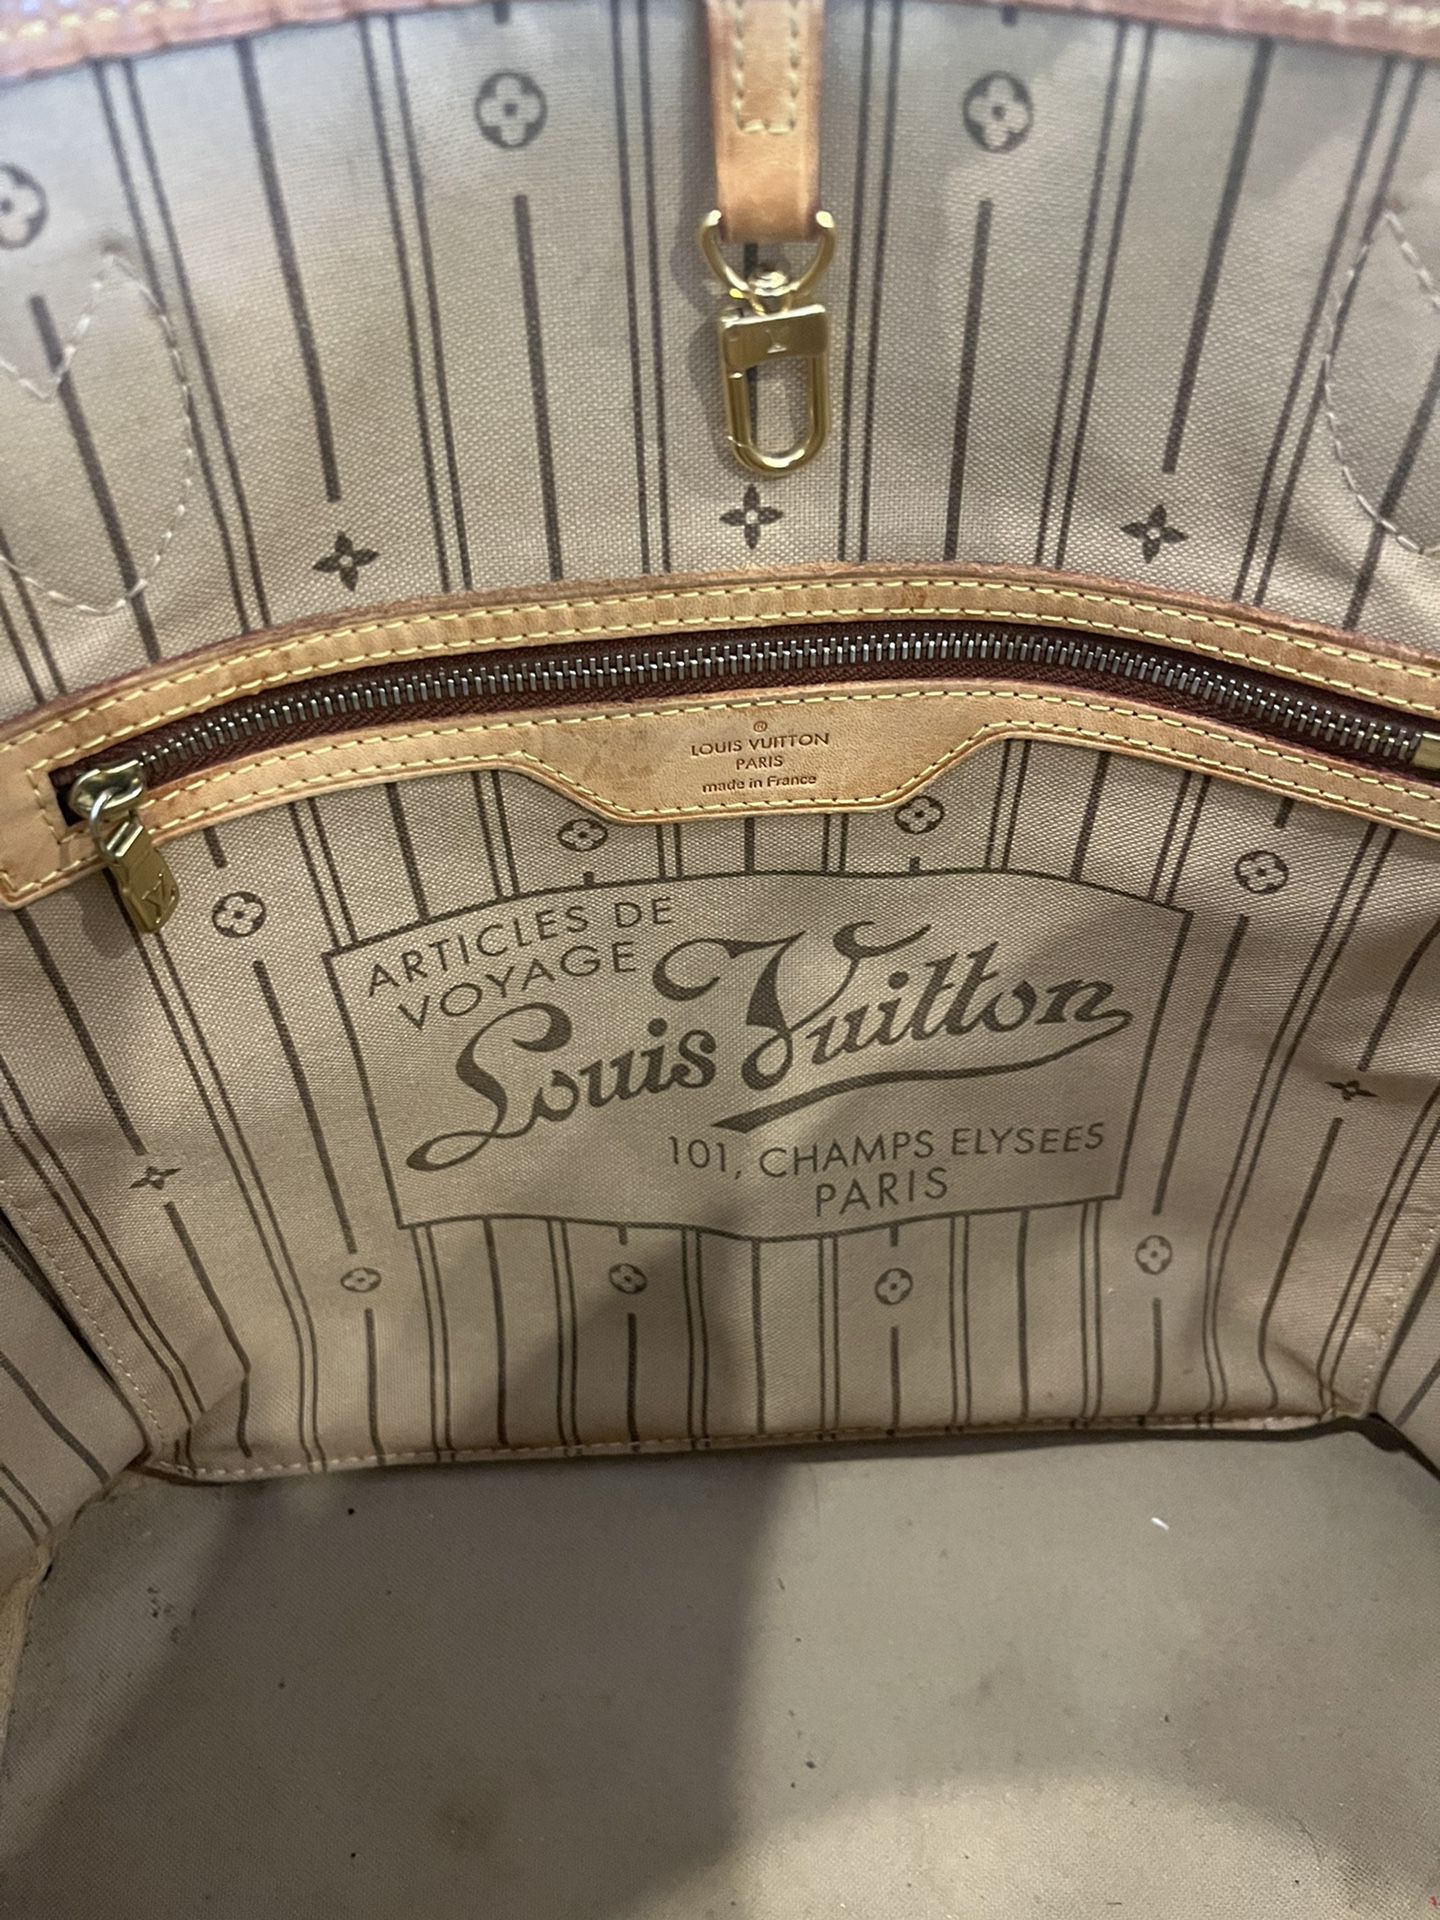 Authentic LV Neverfull GM for Sale in Mesa, AZ - OfferUp